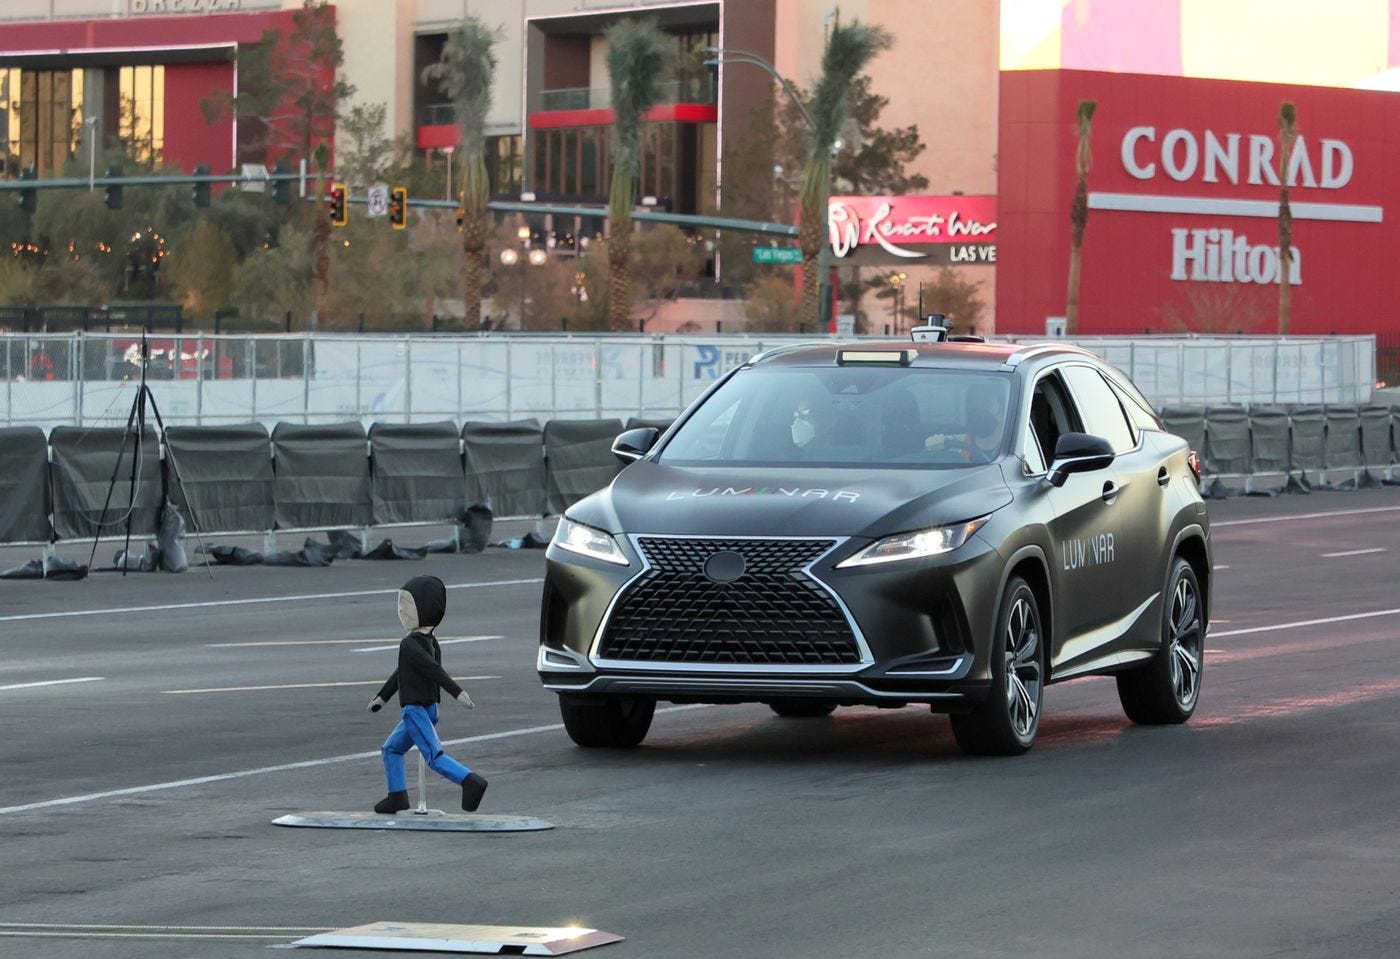 A Lexus with automatic braking technology avoids colliding with a crash test dummy as part of a safety demonstration at the consumer technology trade show CES 2022 in January.&nbsp;